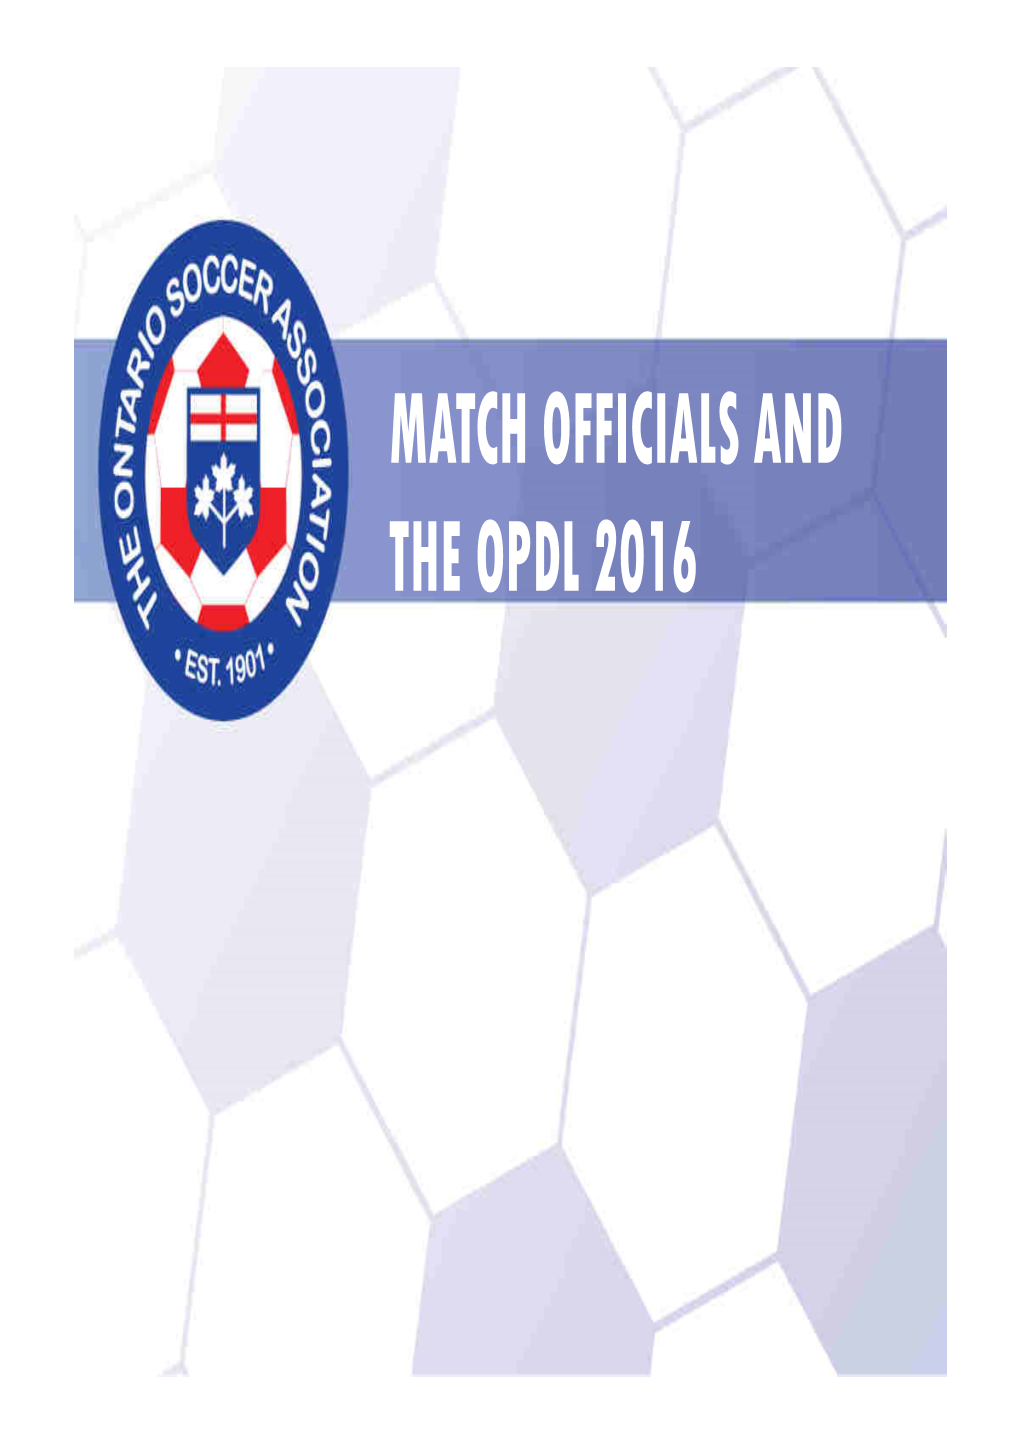 MATCH OFFICIALS and the OPDL 2016 This League Brings Different Responsibilities and Expectations of Its Clubs, Their Technical Staff and Match Officials